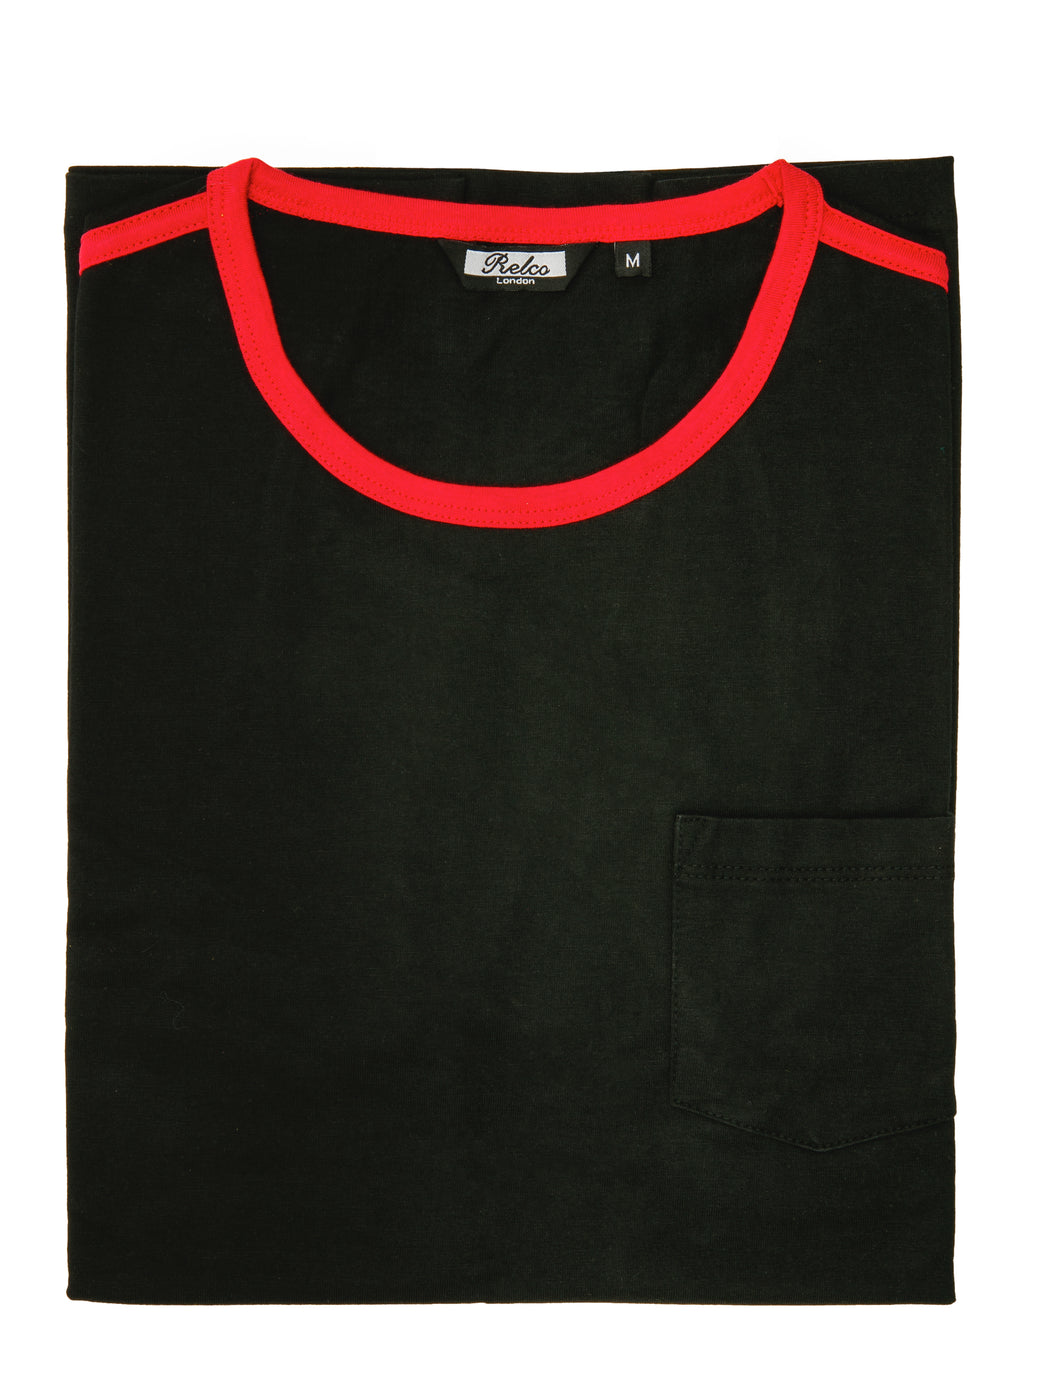 black and red ringer tee